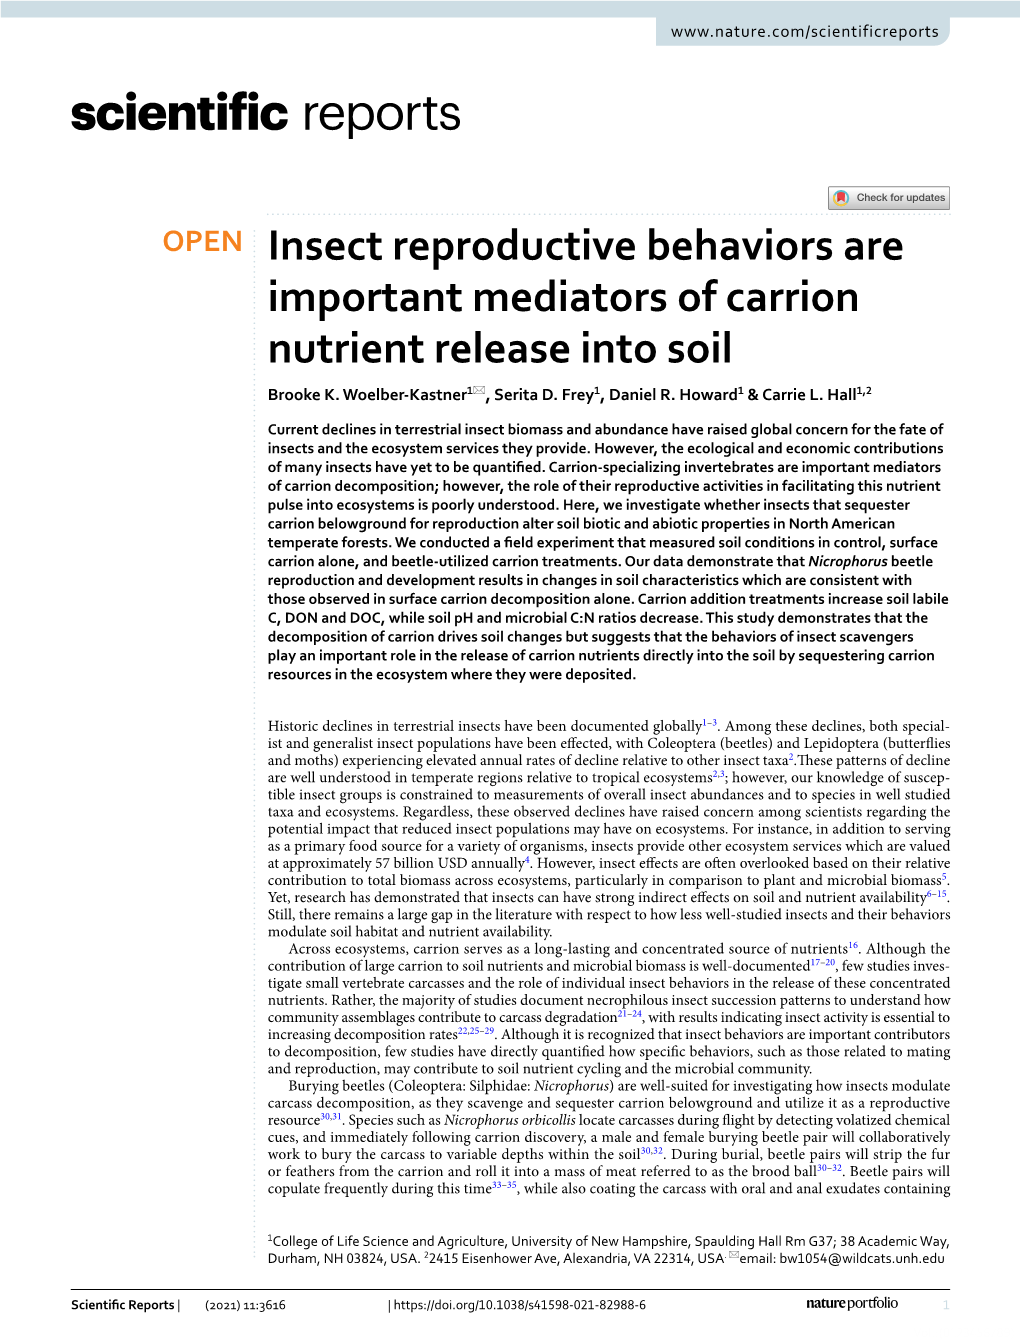 Insect Reproductive Behaviors Are Important Mediators of Carrion Nutrient Release Into Soil Brooke K